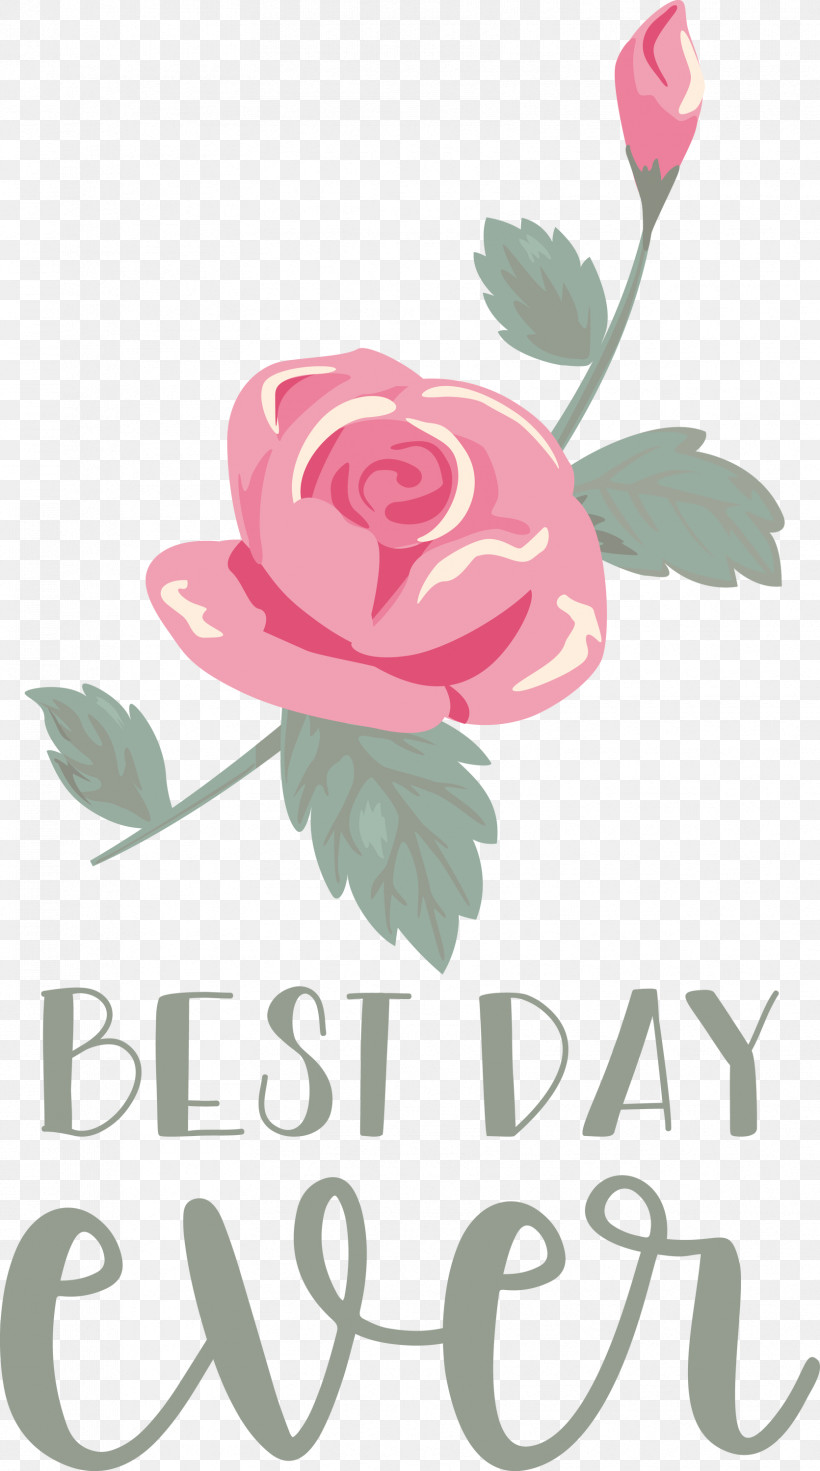 Best Day Ever Wedding, PNG, 1671x2999px, Best Day Ever, Cut Flowers, Floral Design, Flower, Garden Roses Download Free